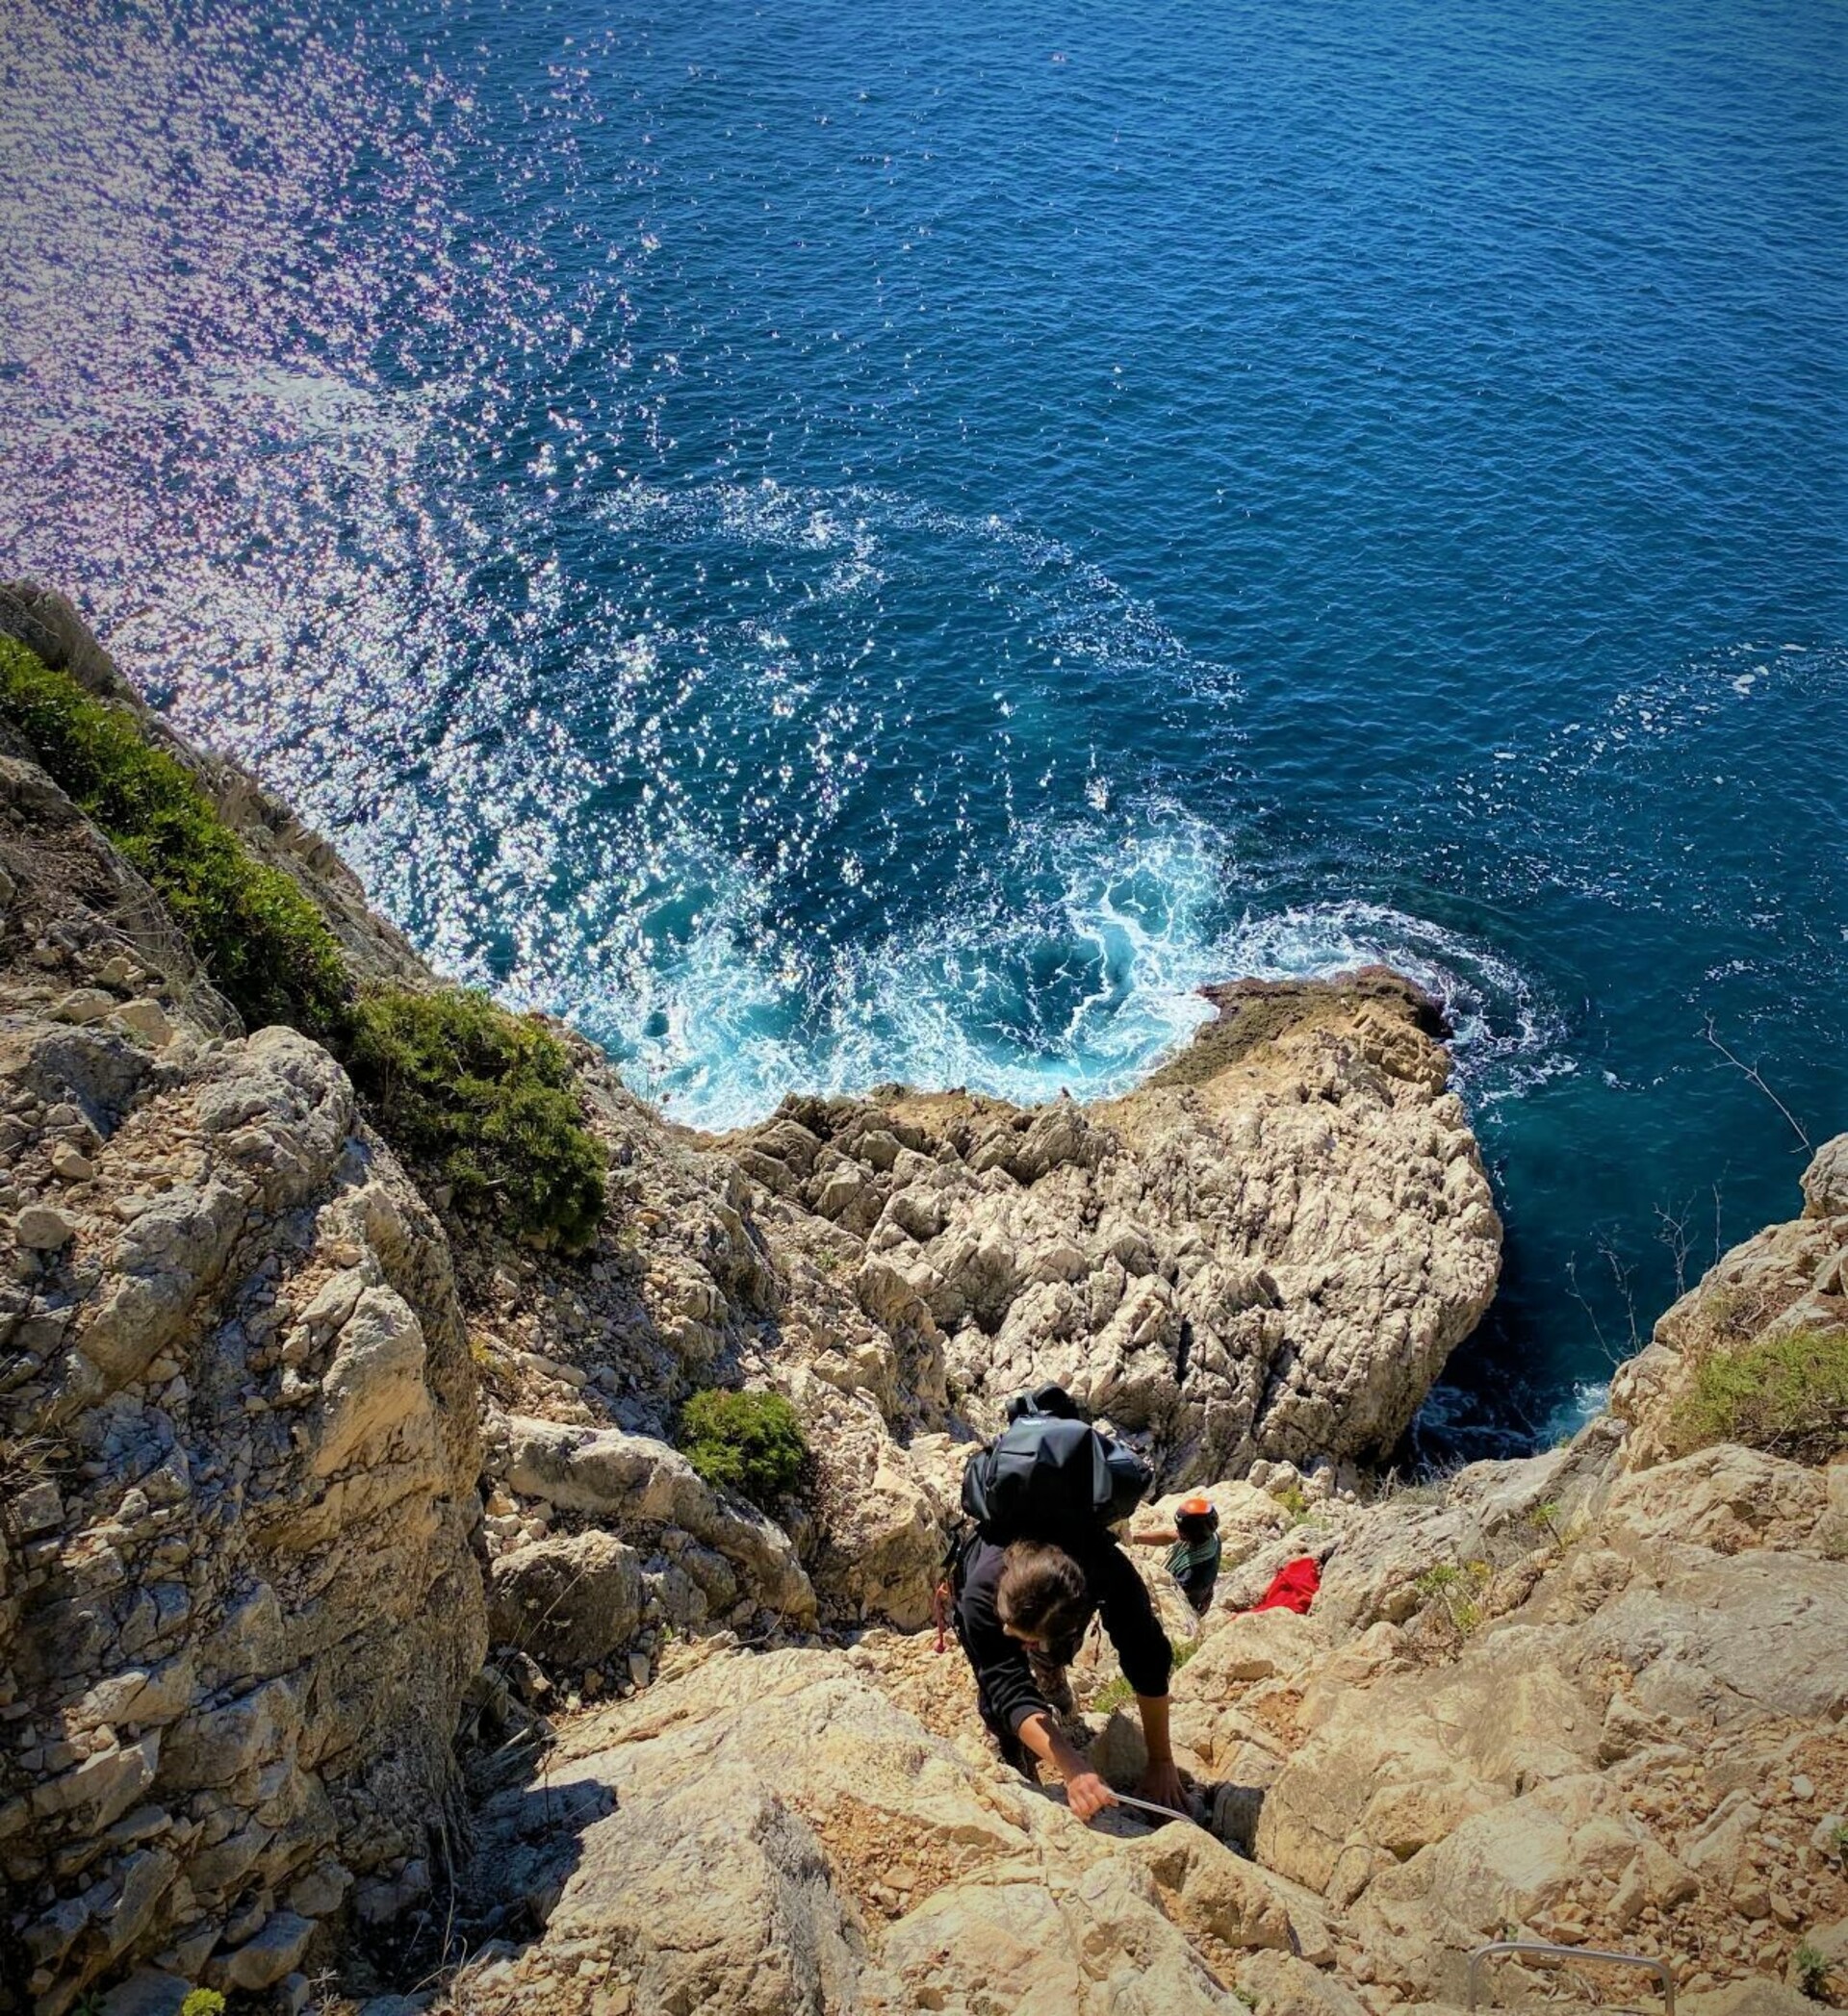 A sport climber going up an easy route on the coast of Portugal